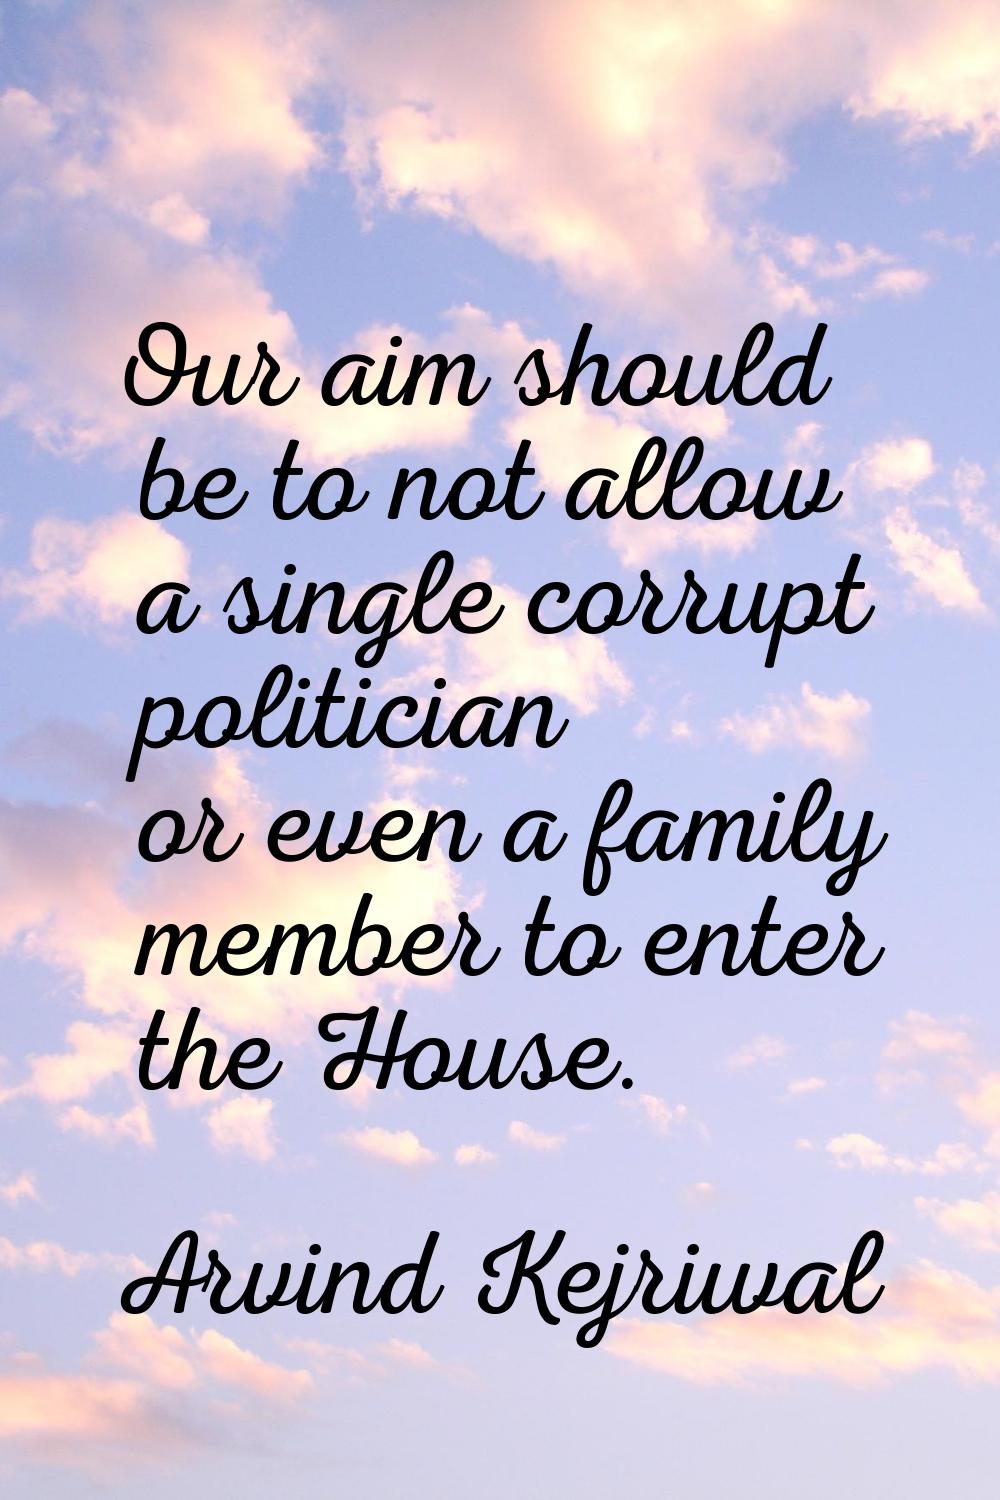 Our aim should be to not allow a single corrupt politician or even a family member to enter the Hou